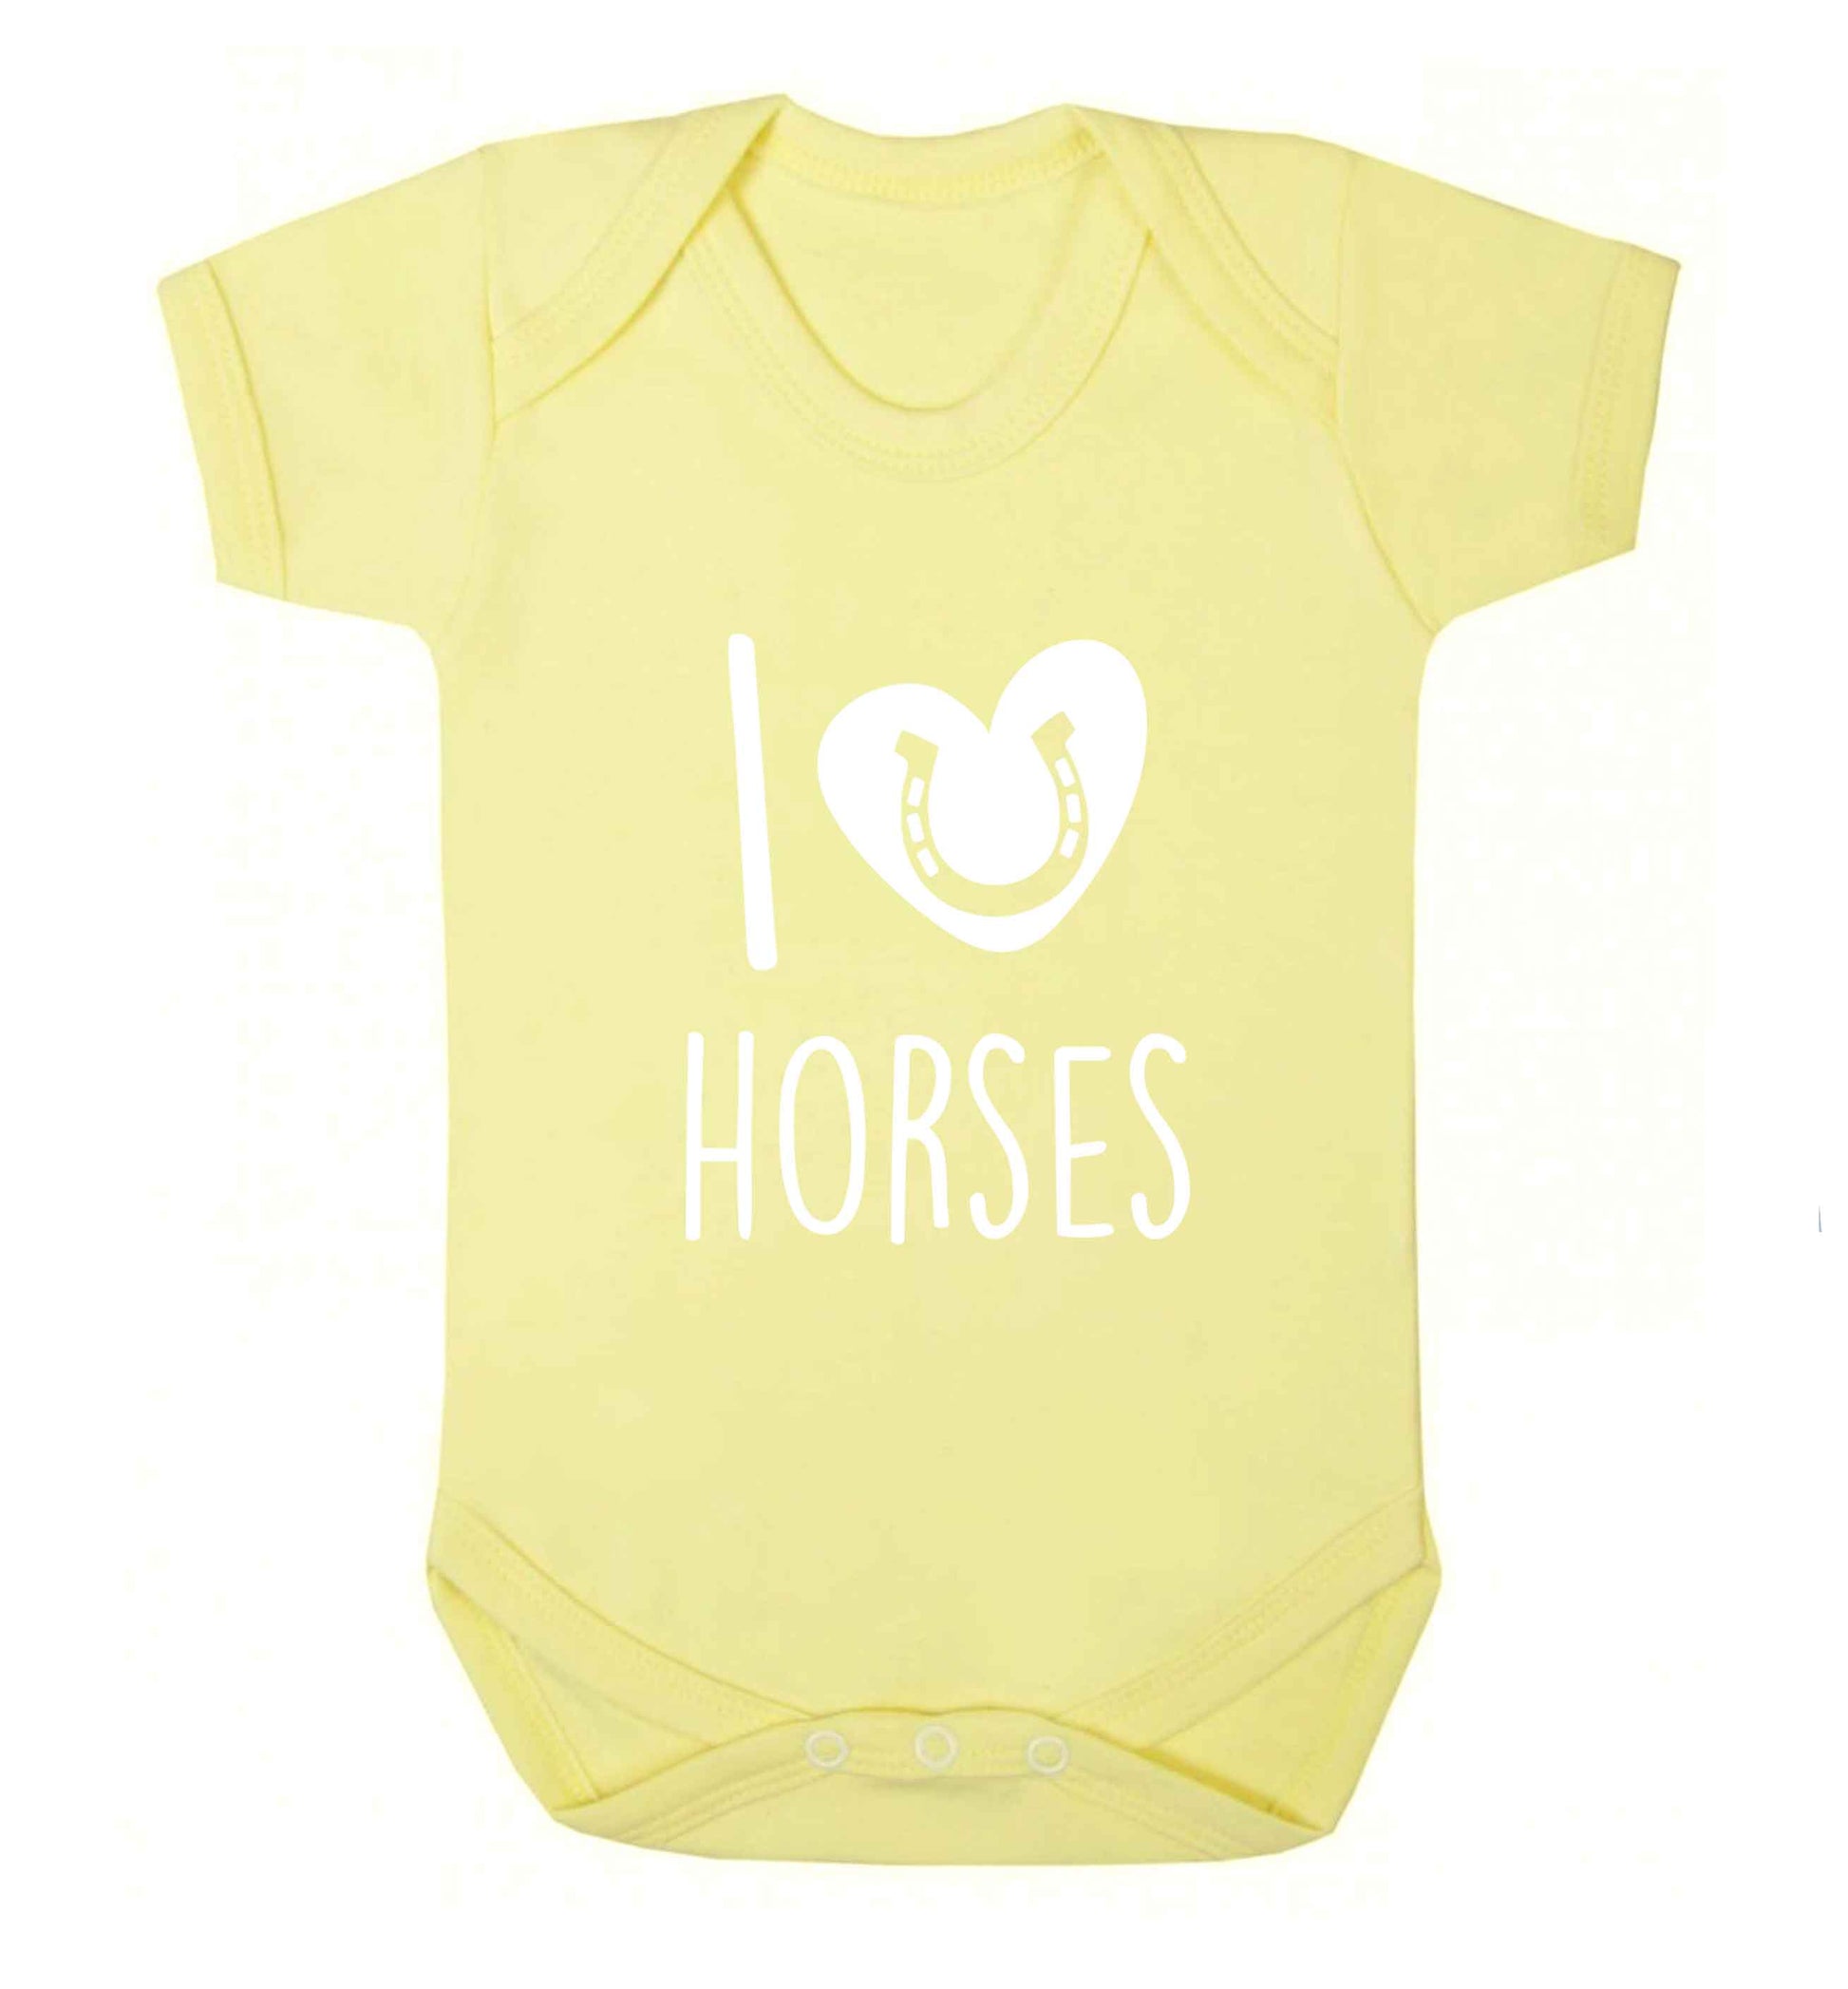 I love horses baby vest pale yellow 18-24 months